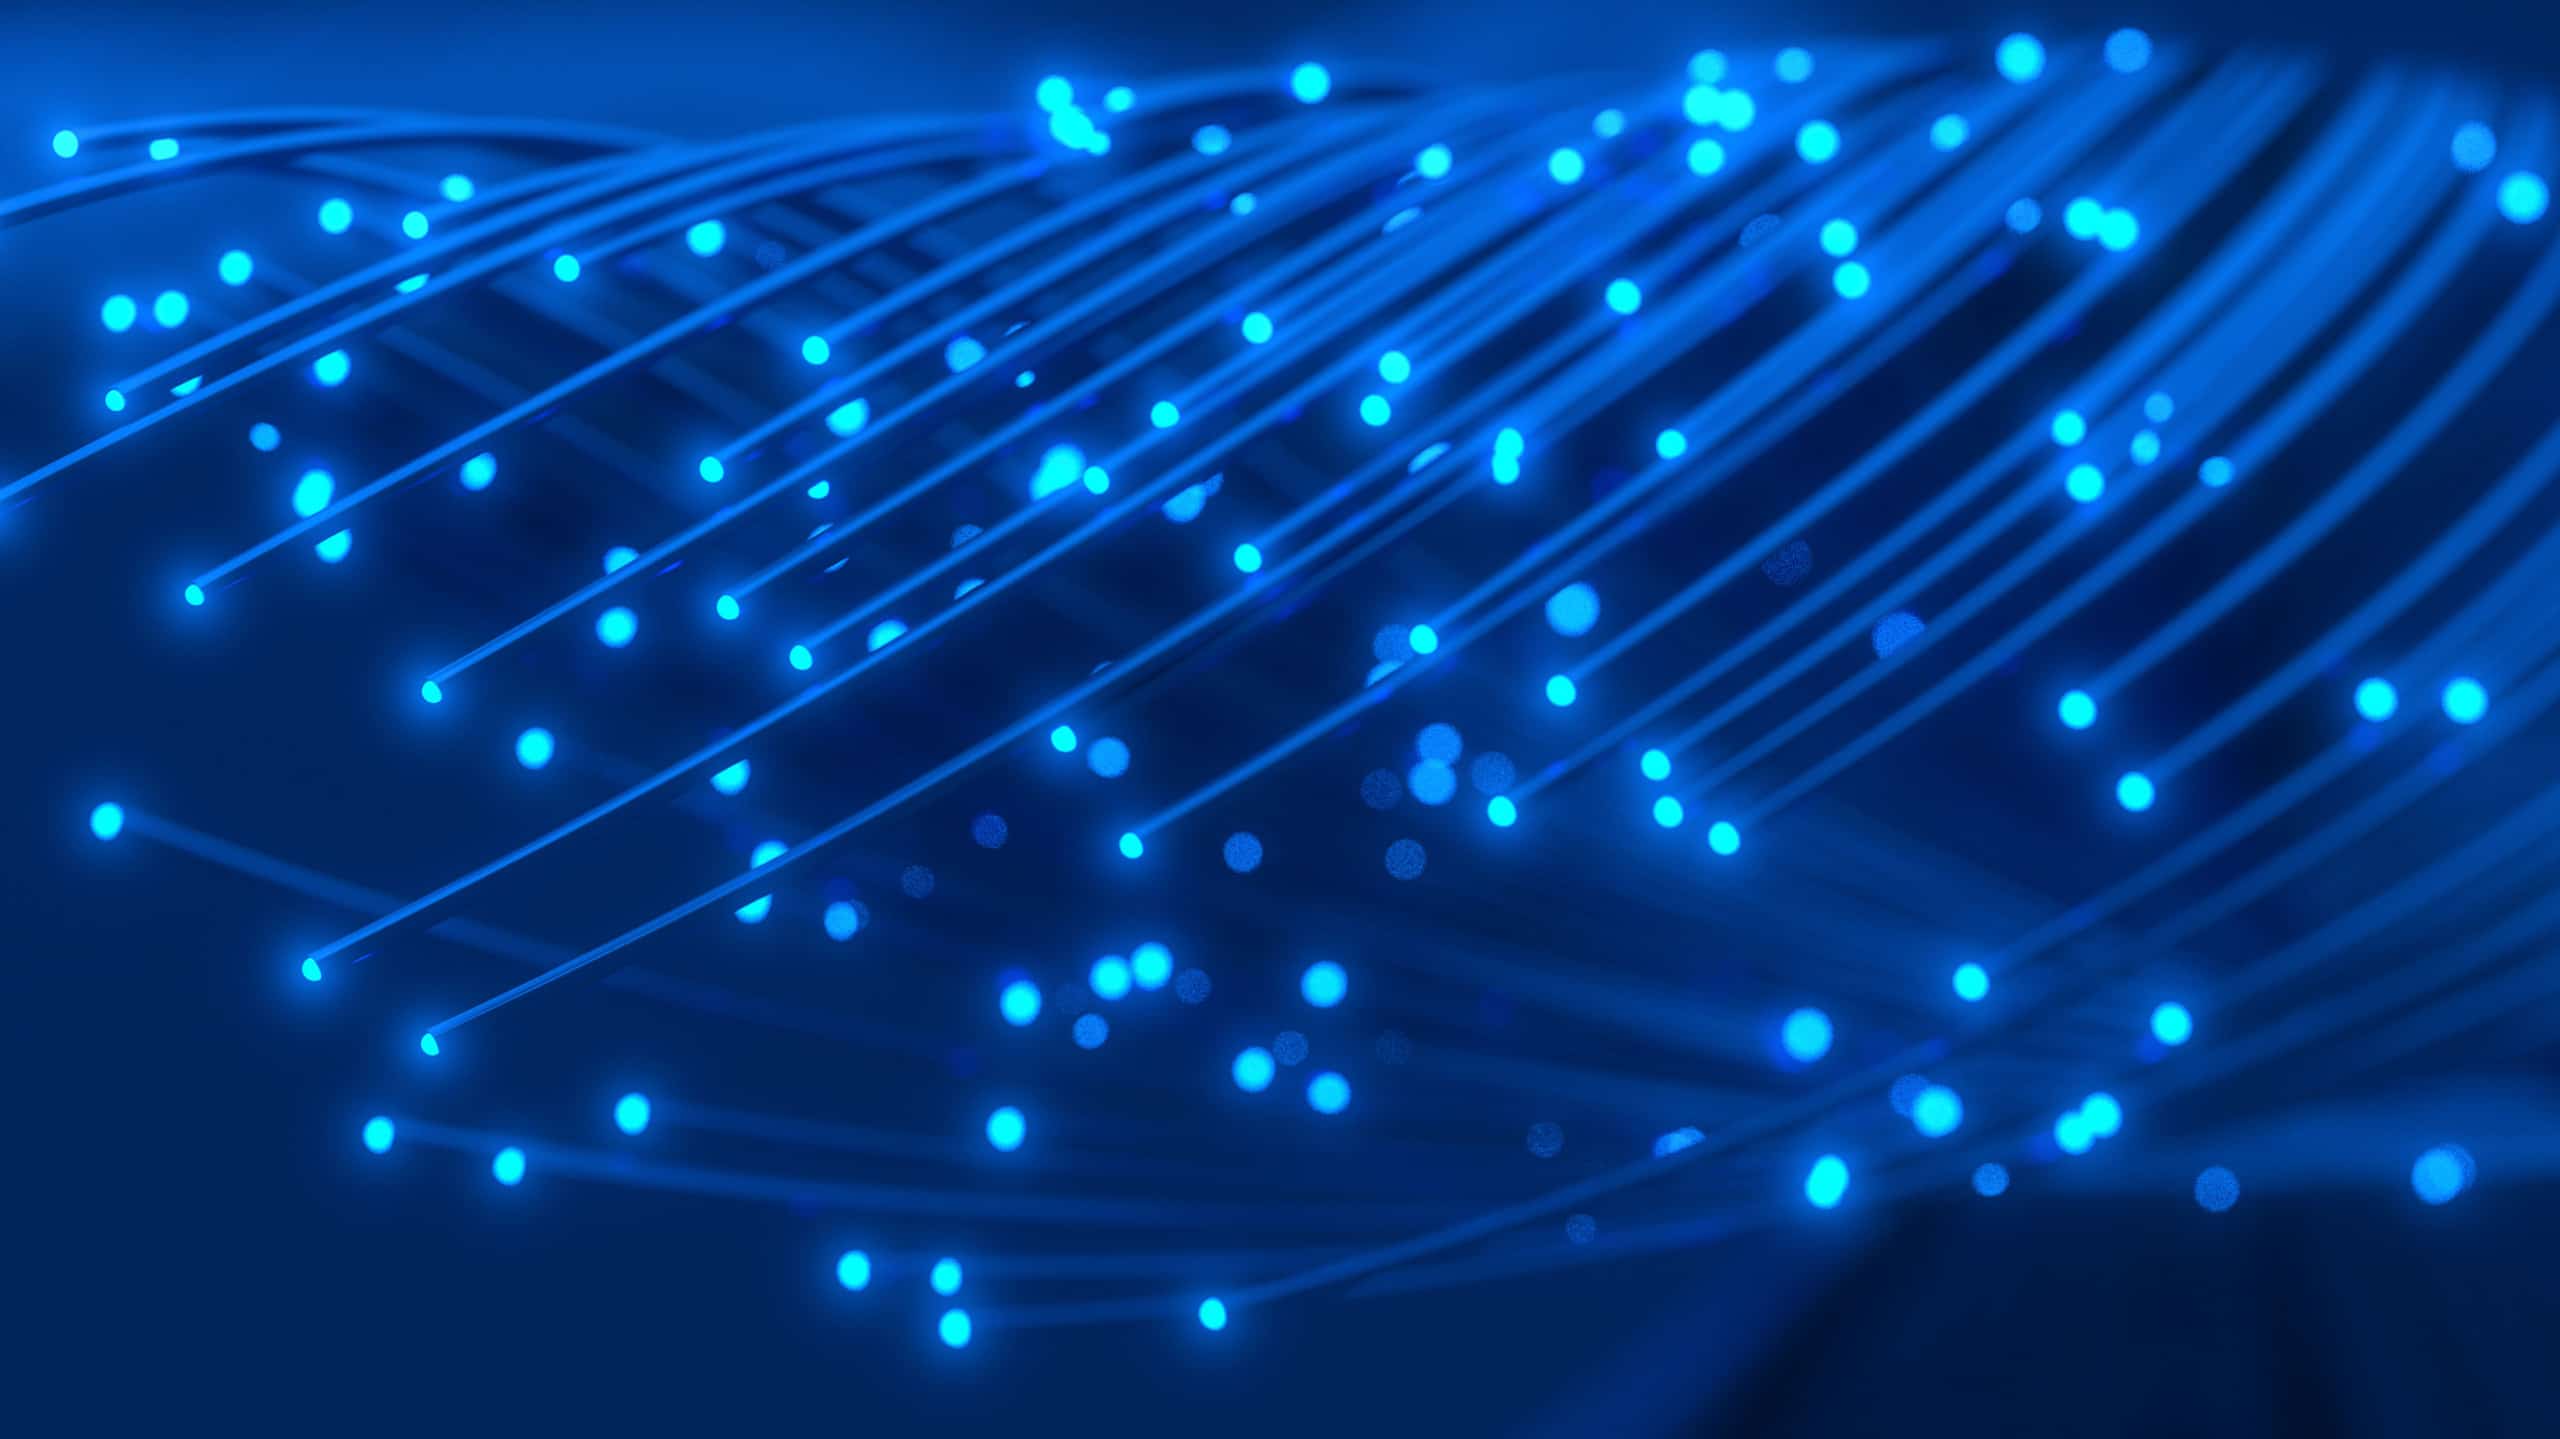 Glowing blue optical fibers spread out against a dark blue background, with light points scattered across the fibers, illustrating technology and data transmission.